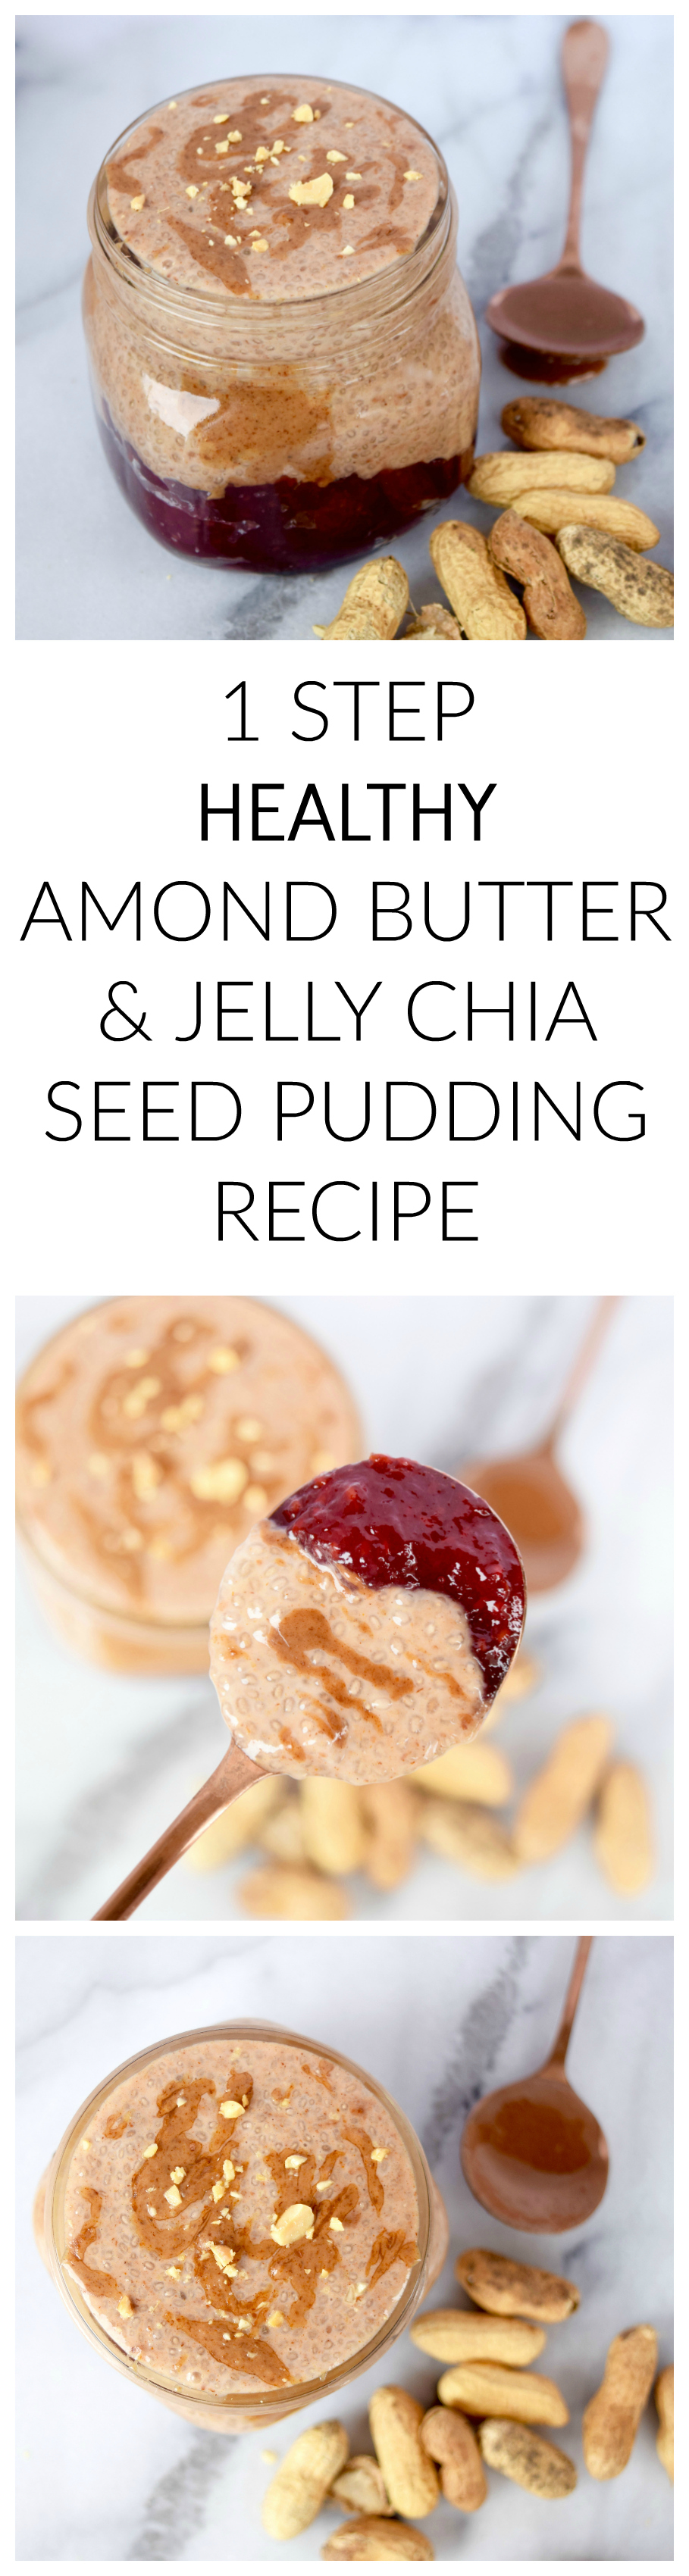 1 STEP HEALTHY Almond Butter & Jelly Chia Seed Pudding Recipe